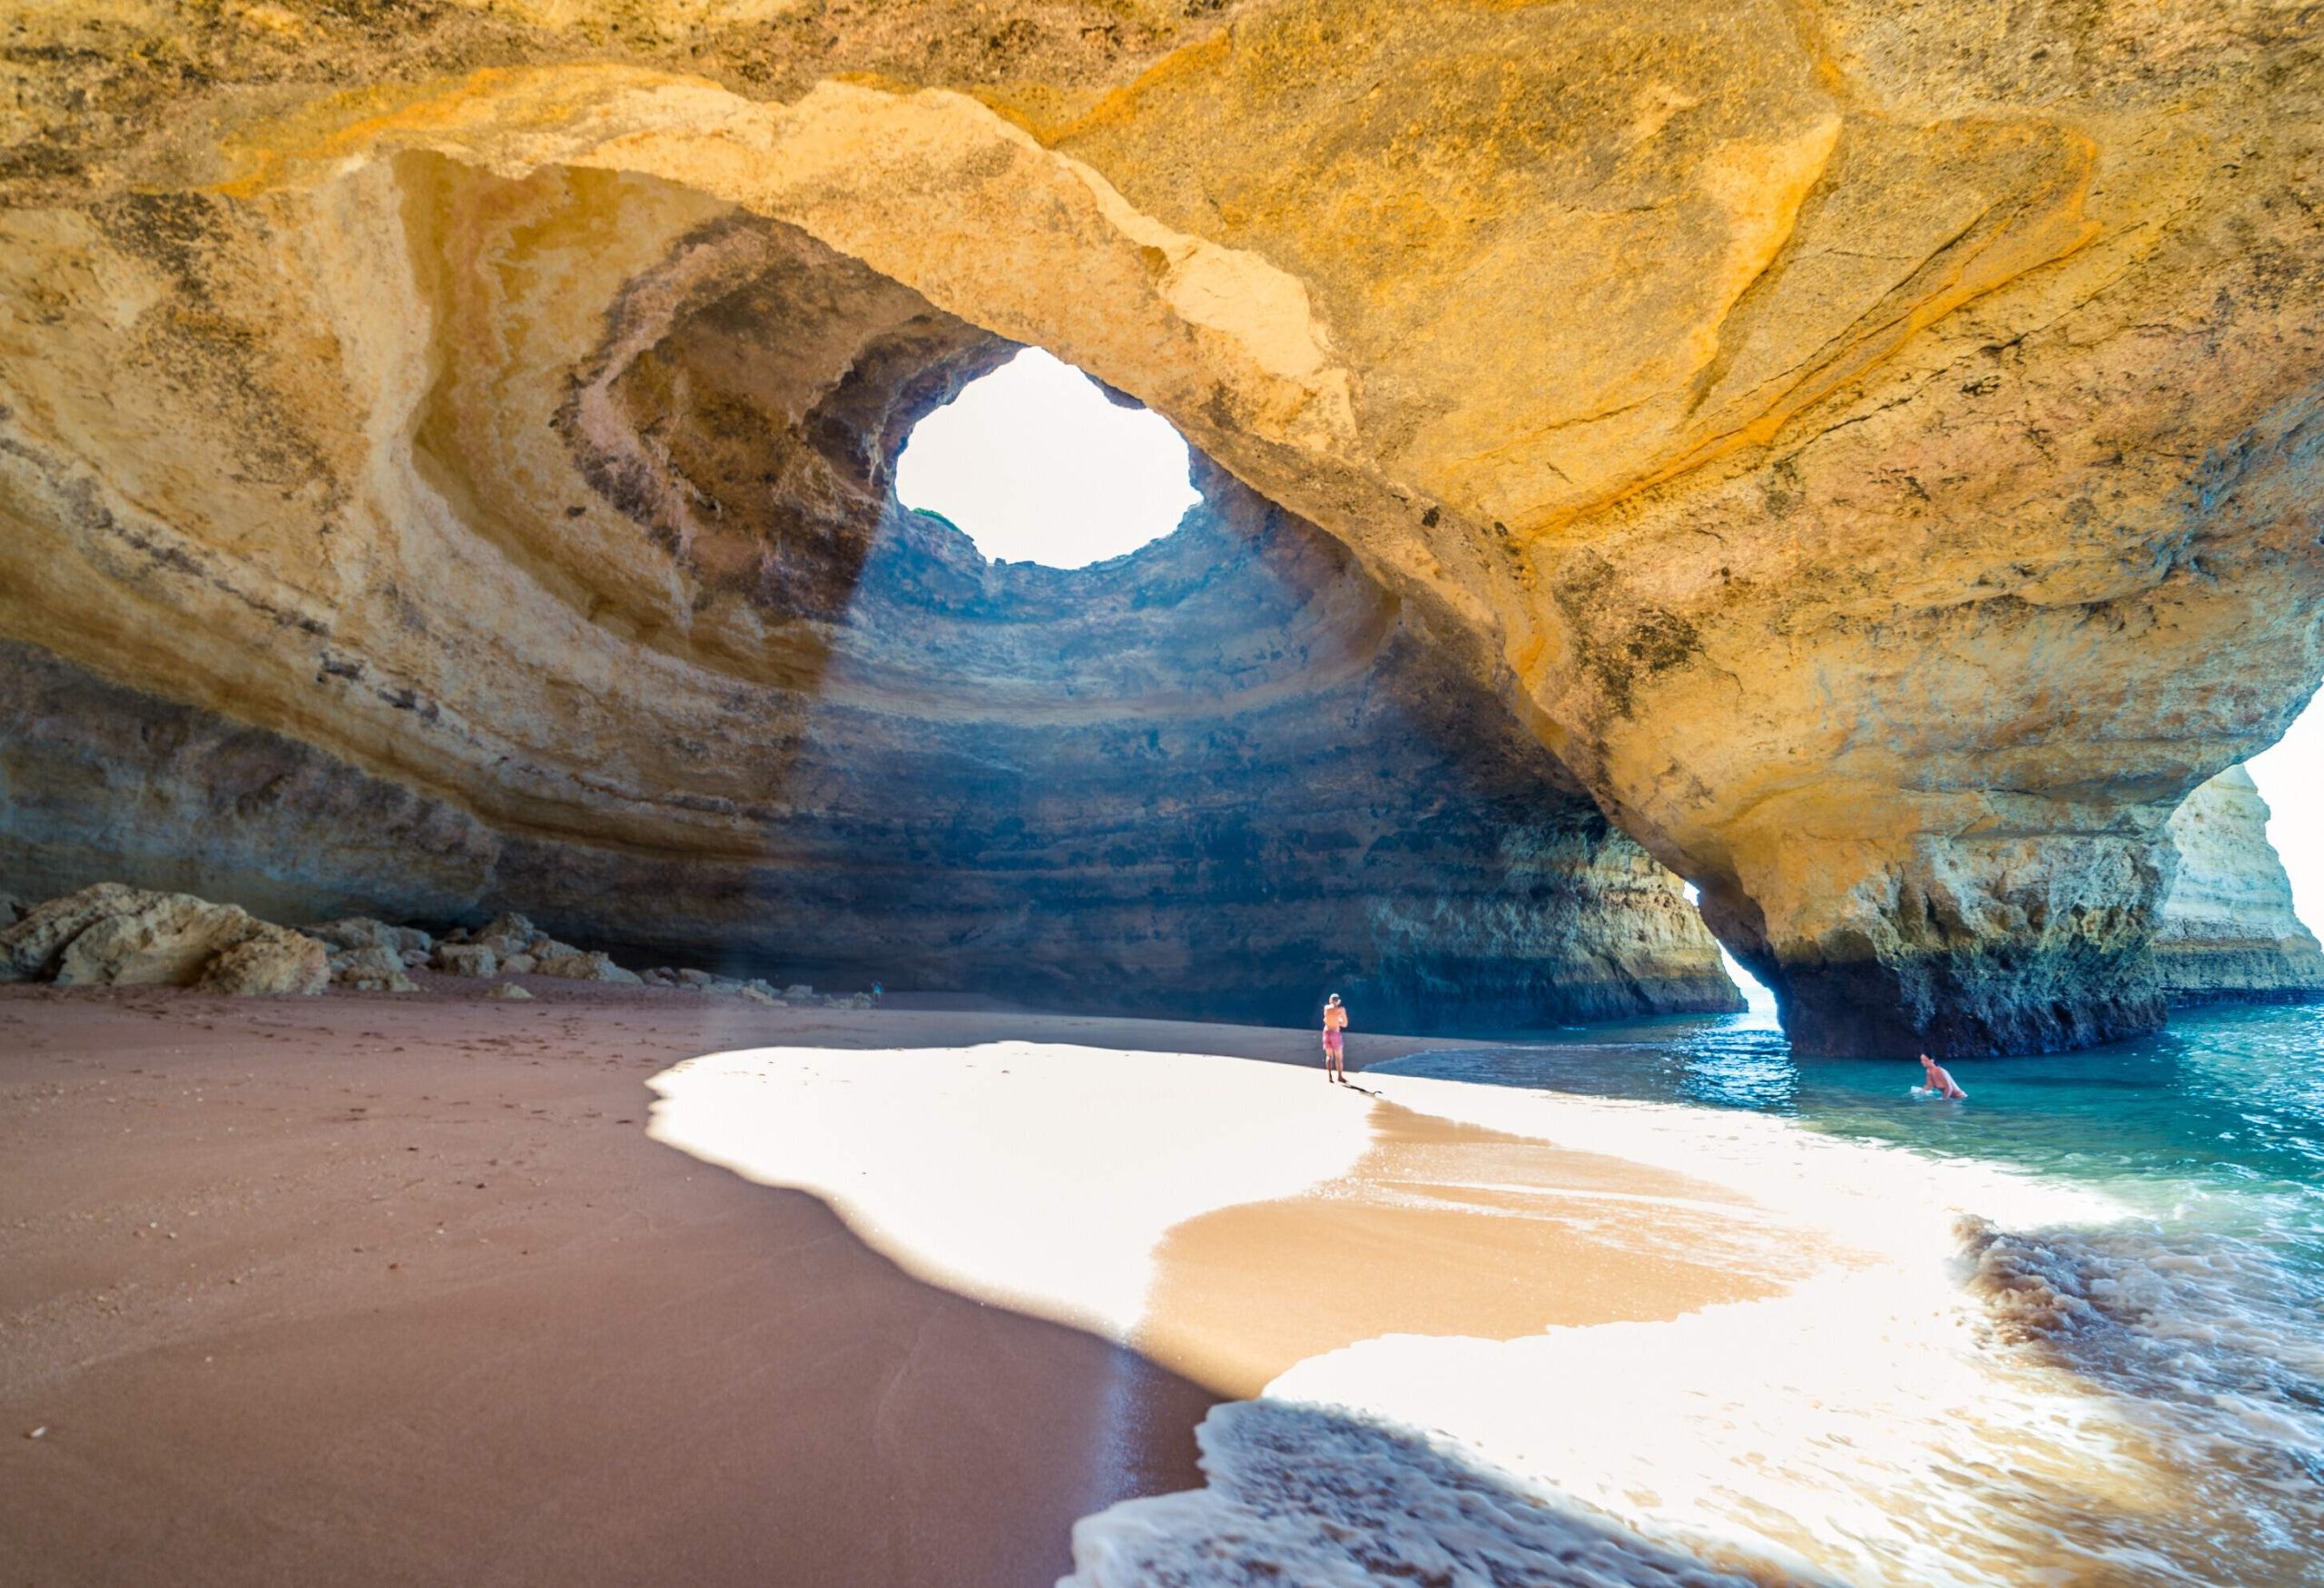 People are swimming on the beach below the cave and basking in the sun through the keyhole.